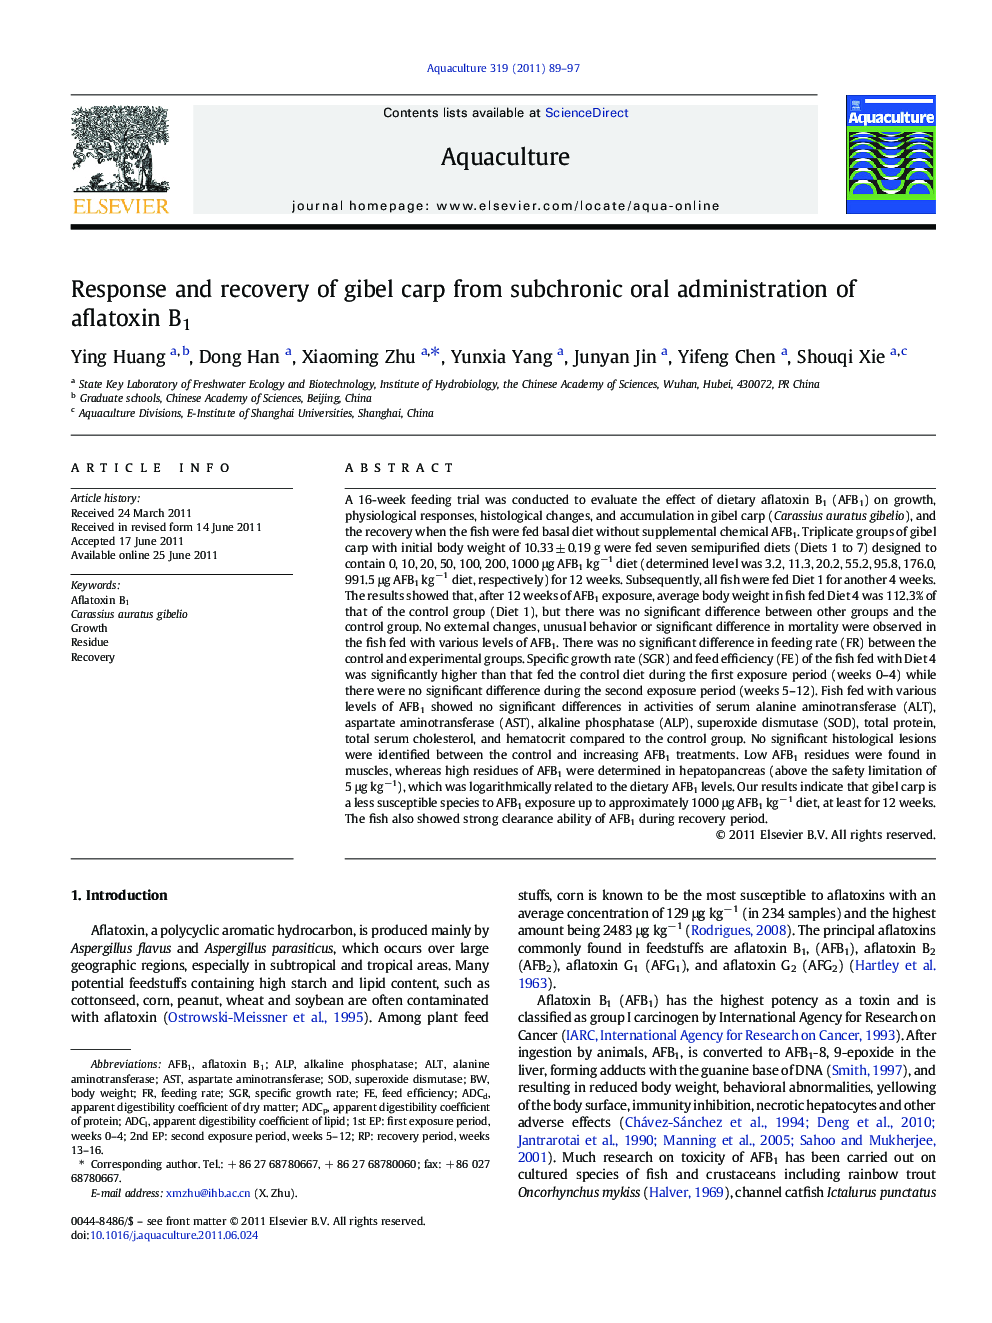 Response and recovery of gibel carp from subchronic oral administration of aflatoxin B1